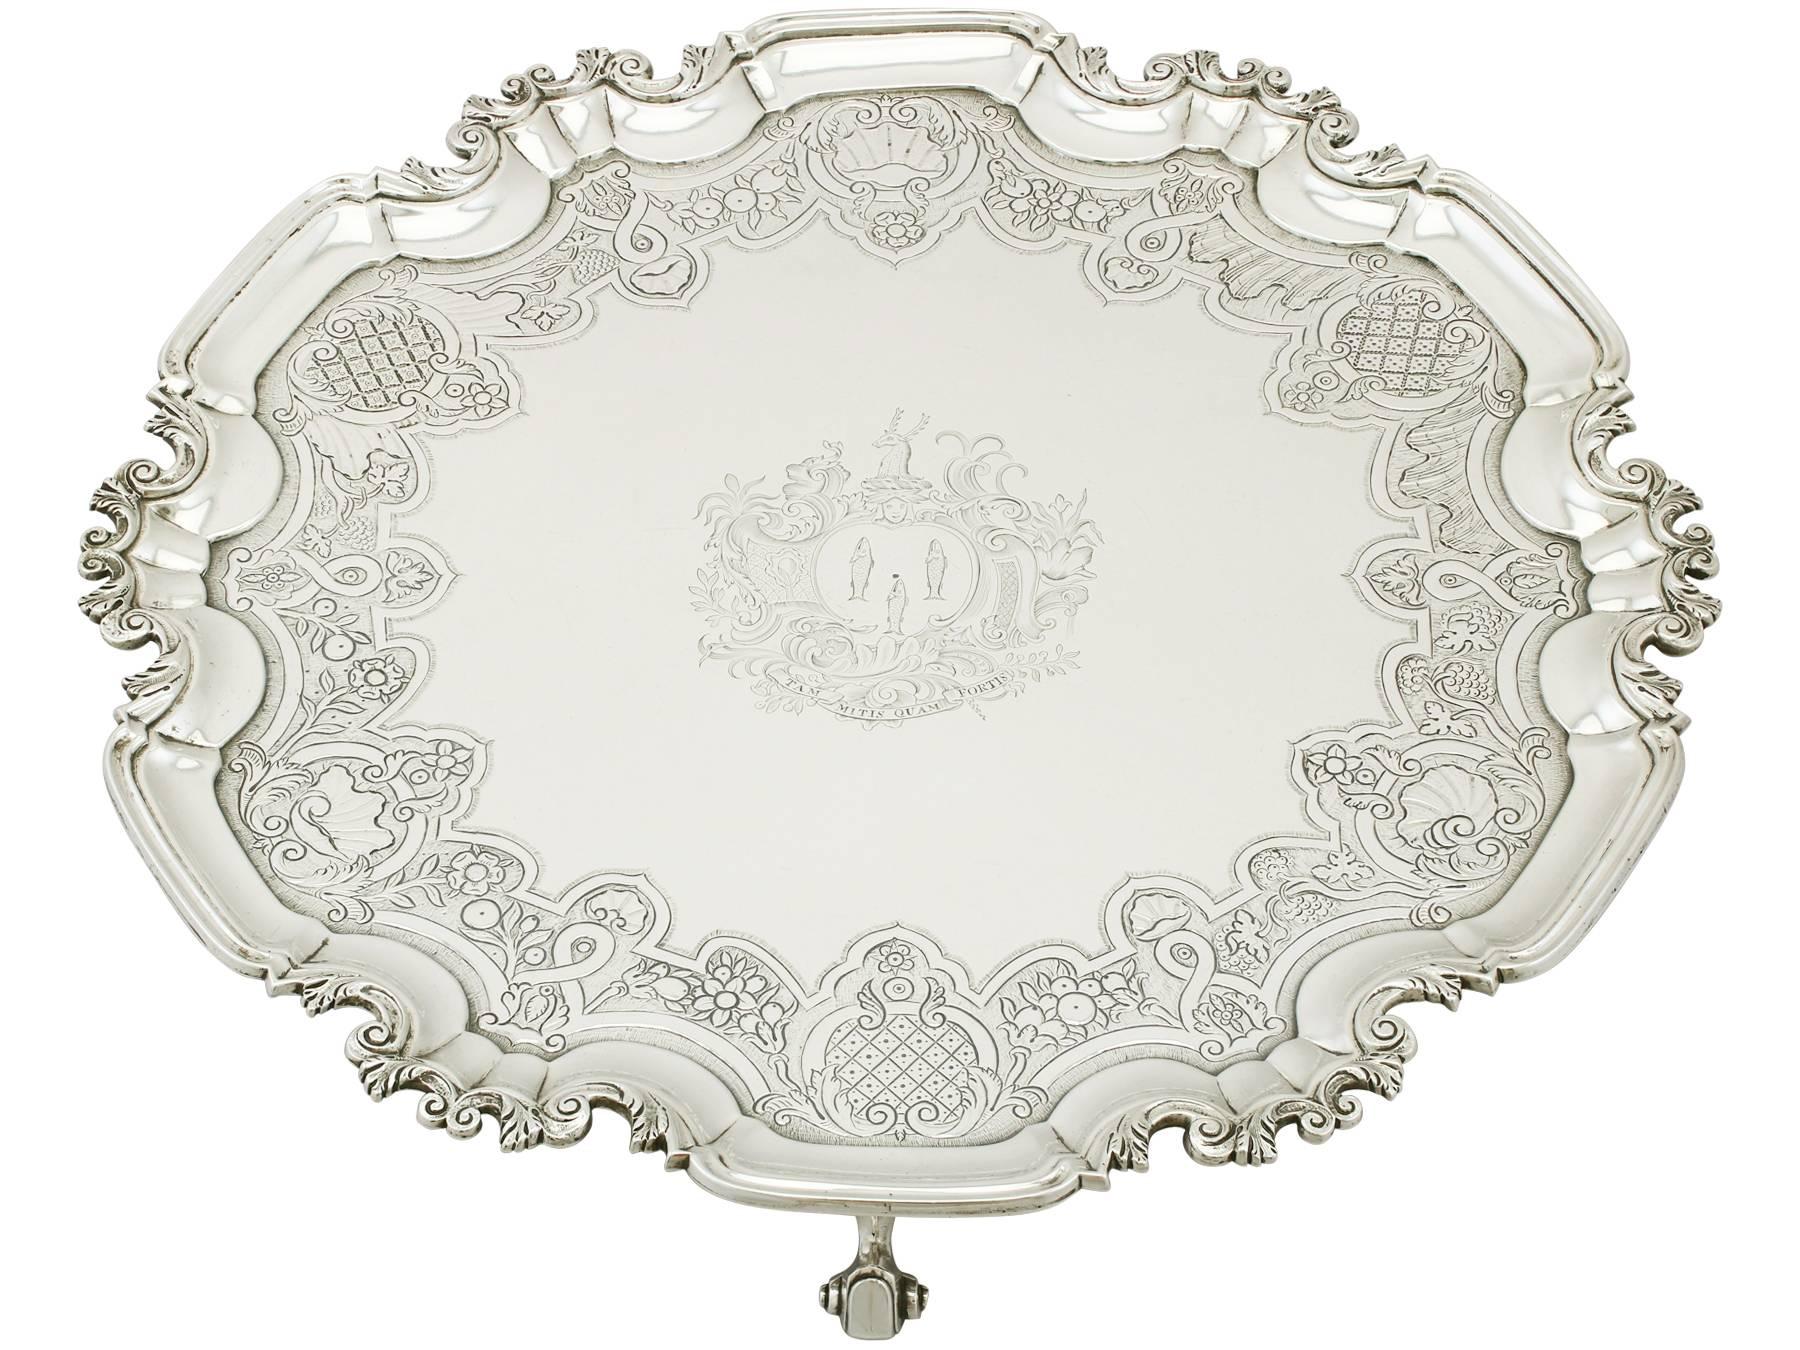 An exceptional, fine and impressive, rare pair of antique Georgian Newcastle sterling silver salvers; part of our Newcastle silverware collection.

These exceptional antique George II Newcastle sterling silver salvers have been crafted in two